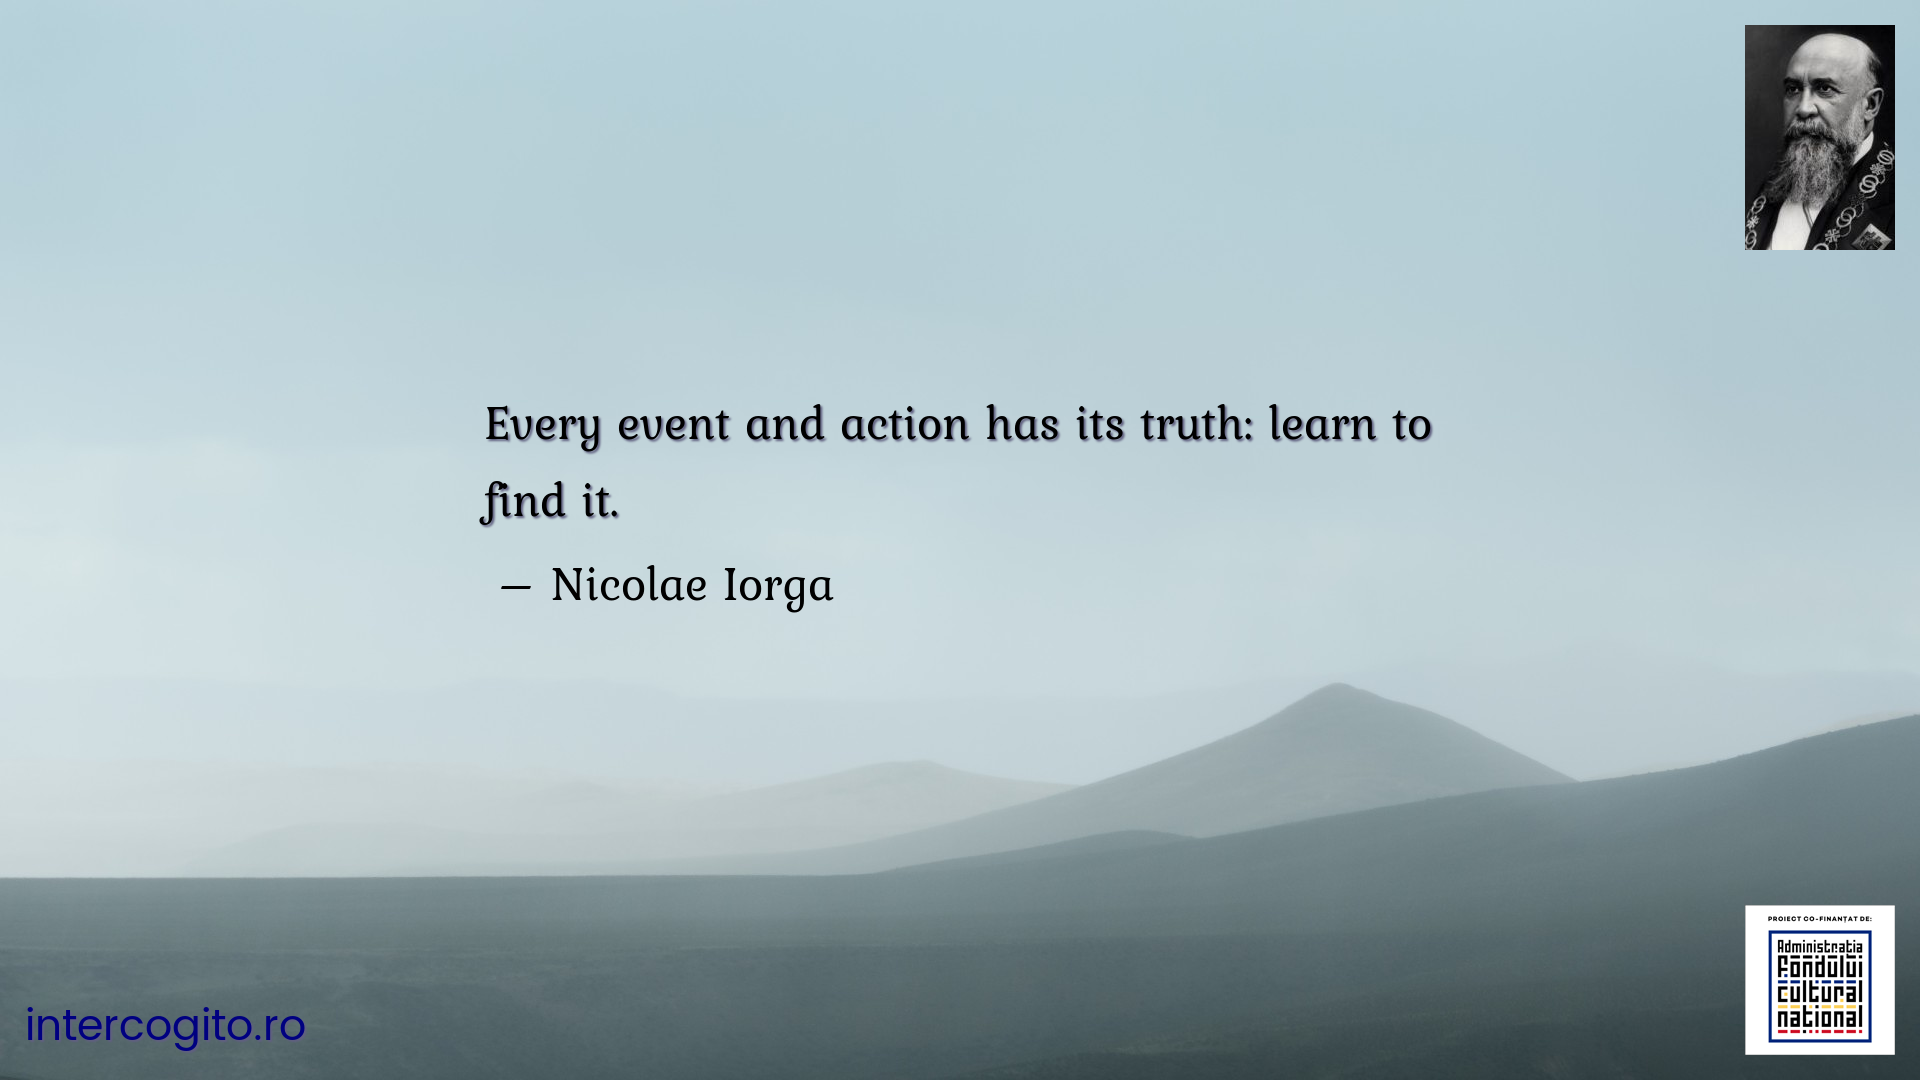 Every event and action has its truth: learn to find it.